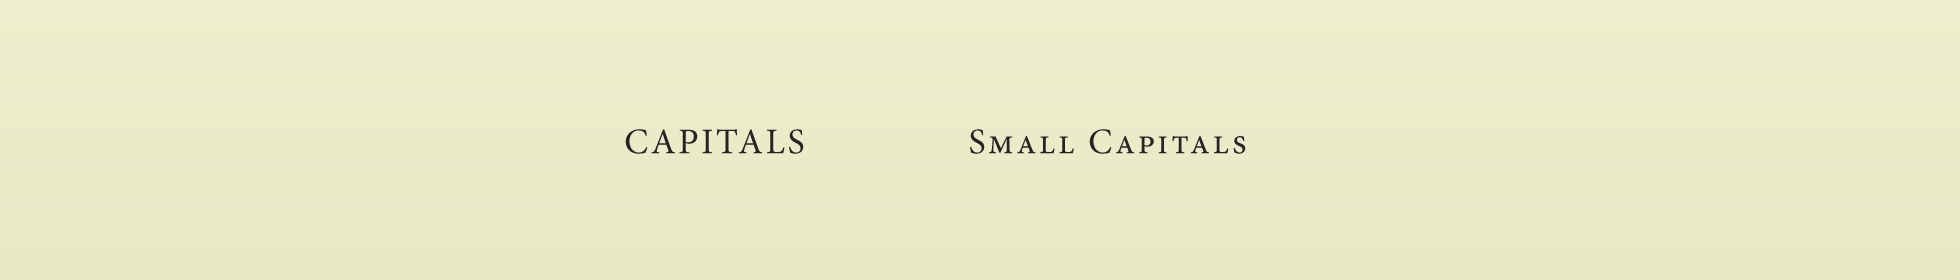 Capital and small capital letters.